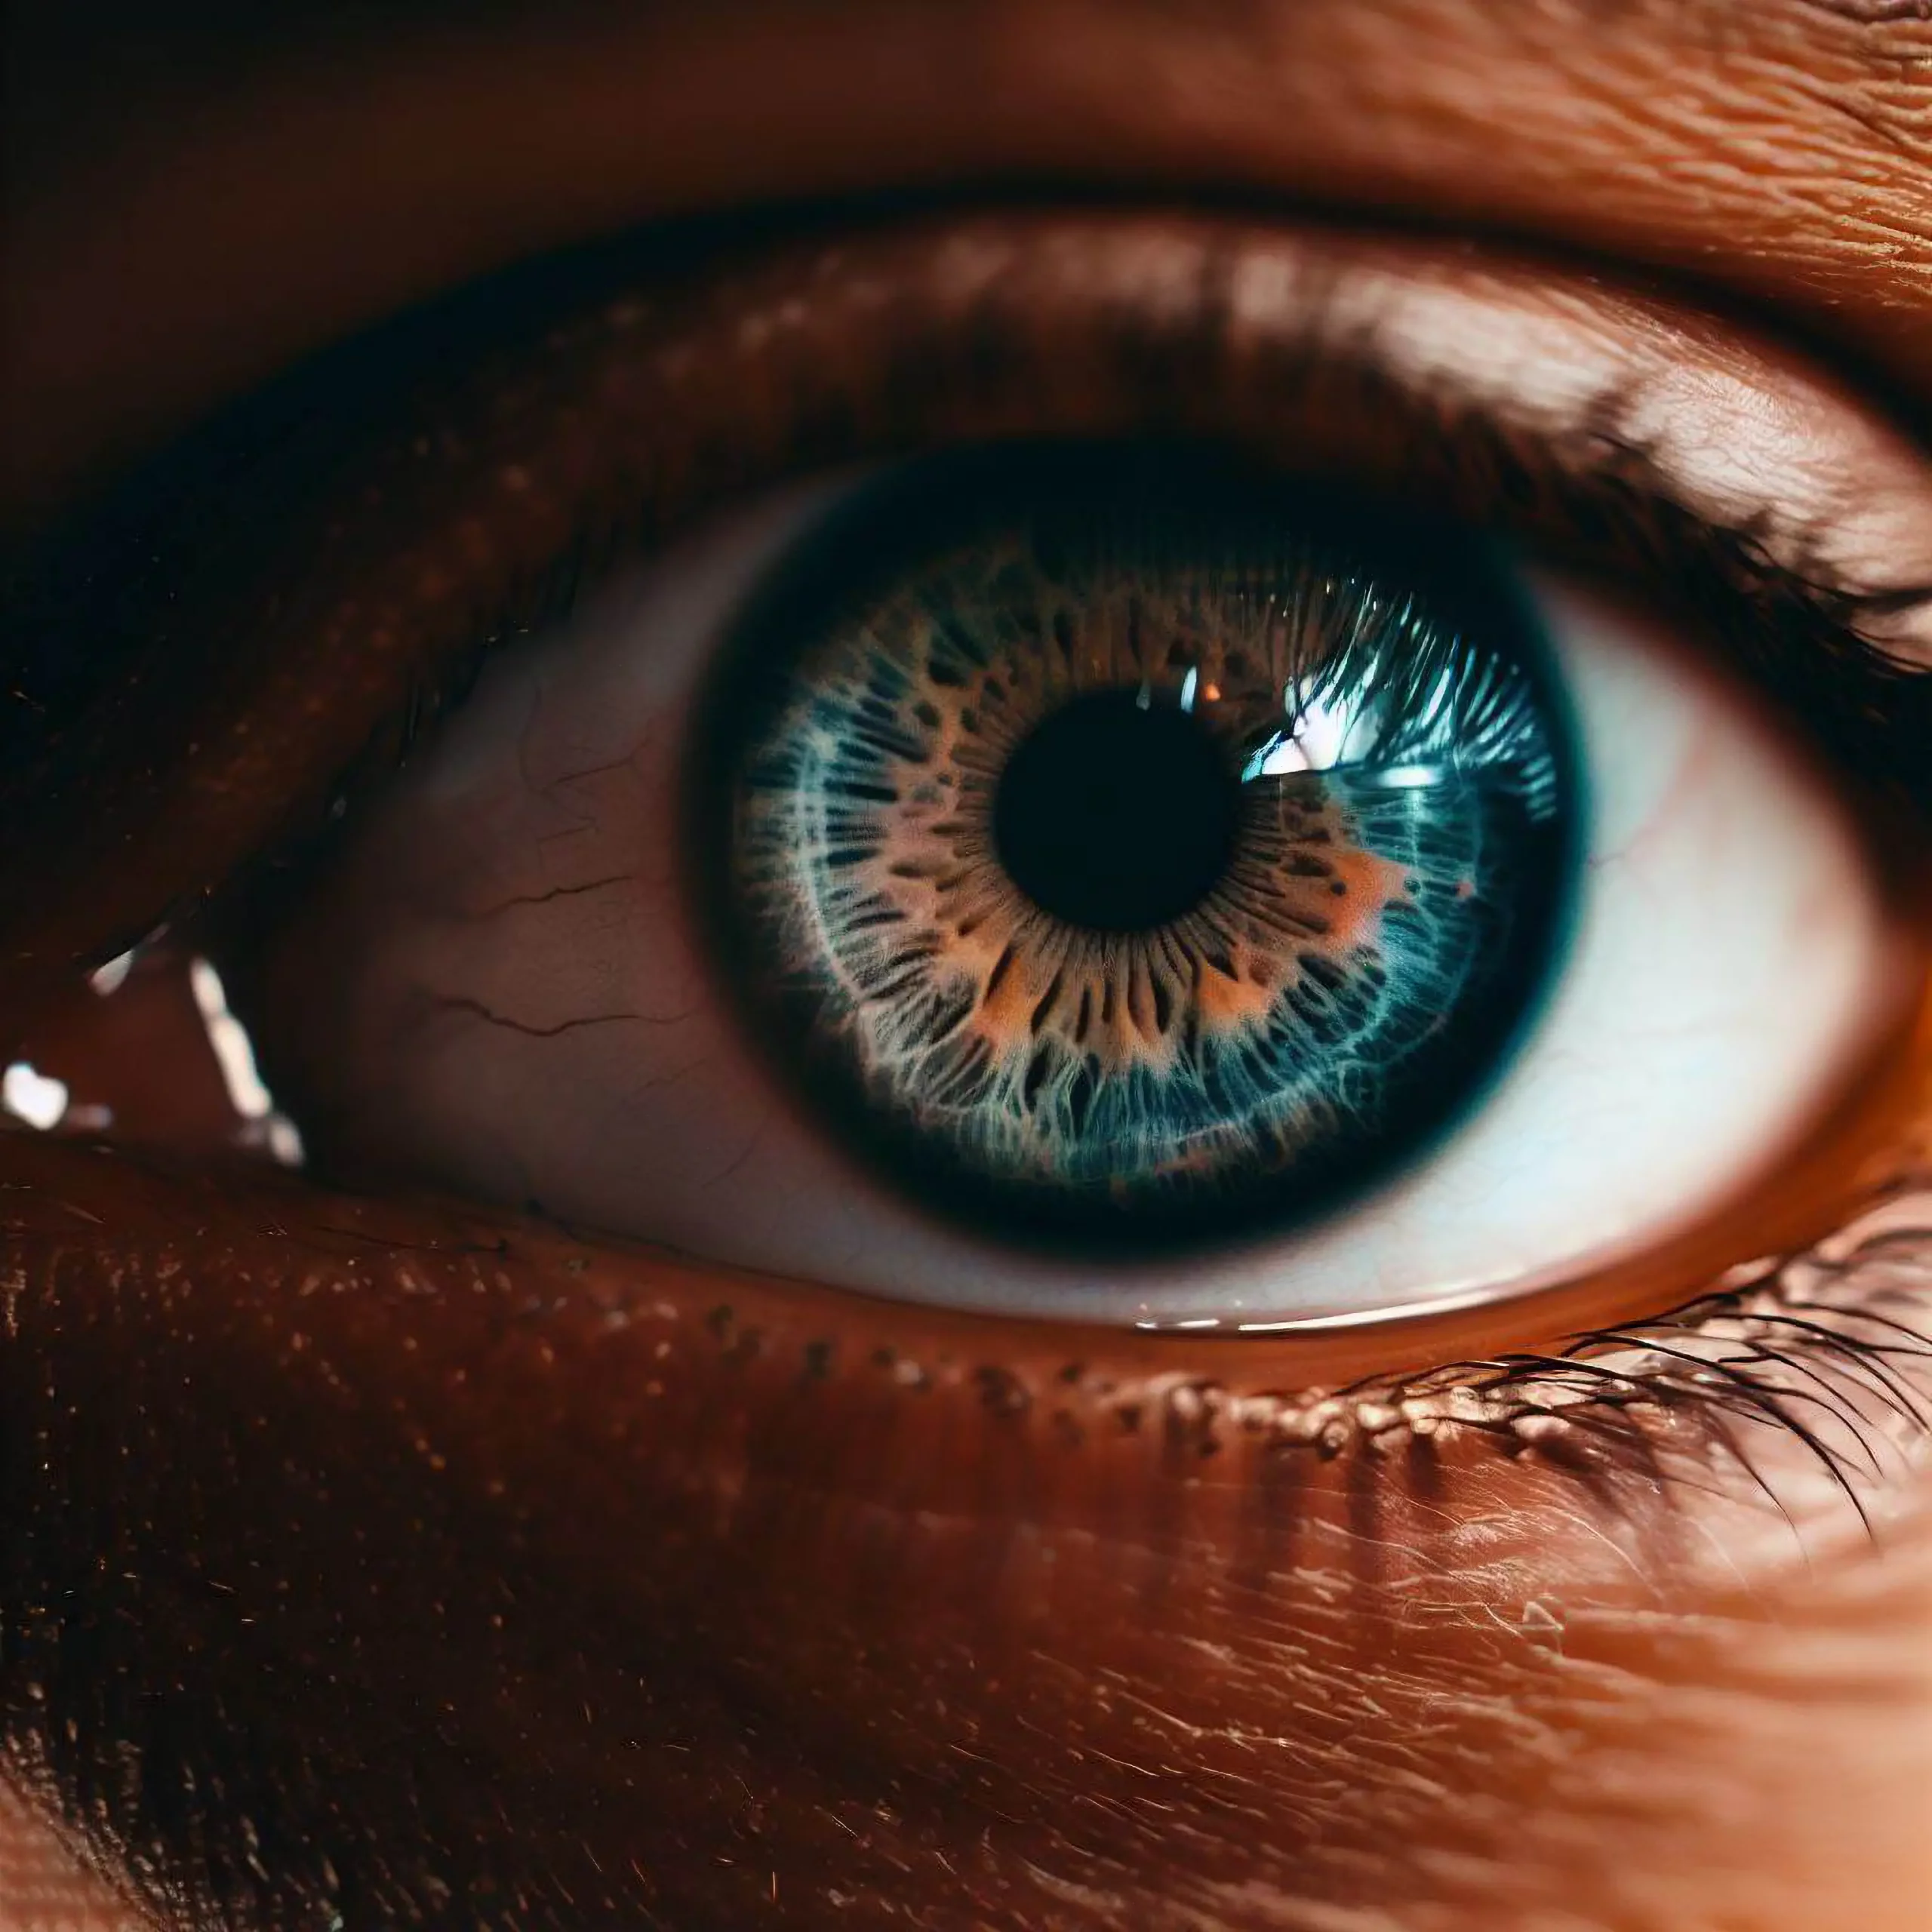 https://imotions.com/wp-content/uploads/2023/05/Close-up-photo-of-an-eye-scaled.webp